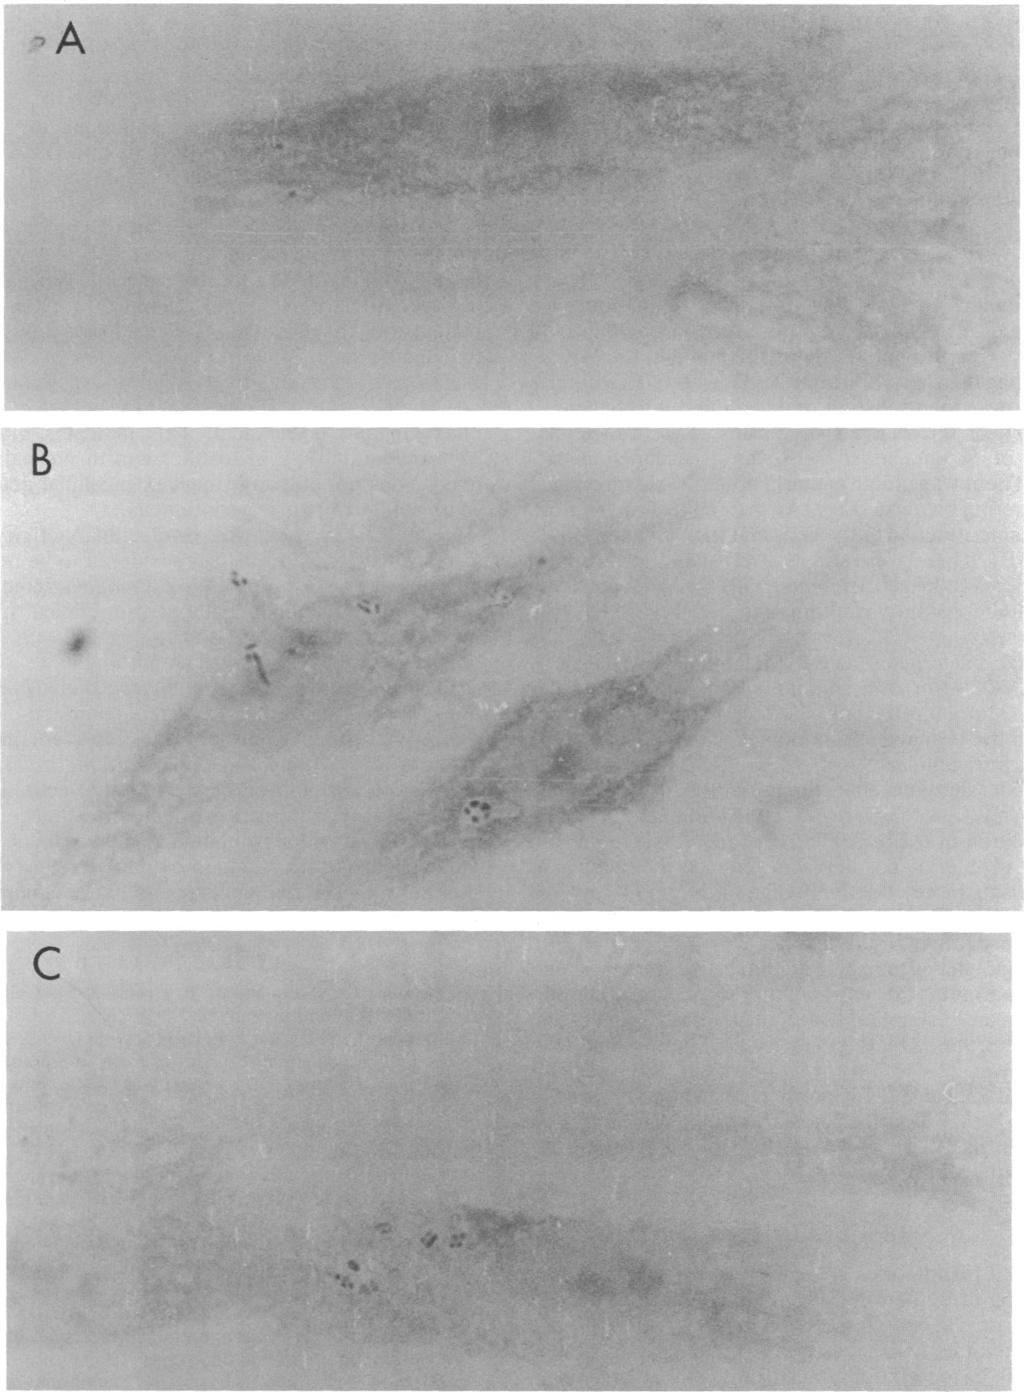 VOL. 34, 1990 INTRACELLULAR ACTIVITY OF TOSUFLOXACIN 951 FIG. 2. Micrographs of infected WI-38 cells after incubation with tosufloxacin (A), ofloxacin (B), and norfloxacin (C).